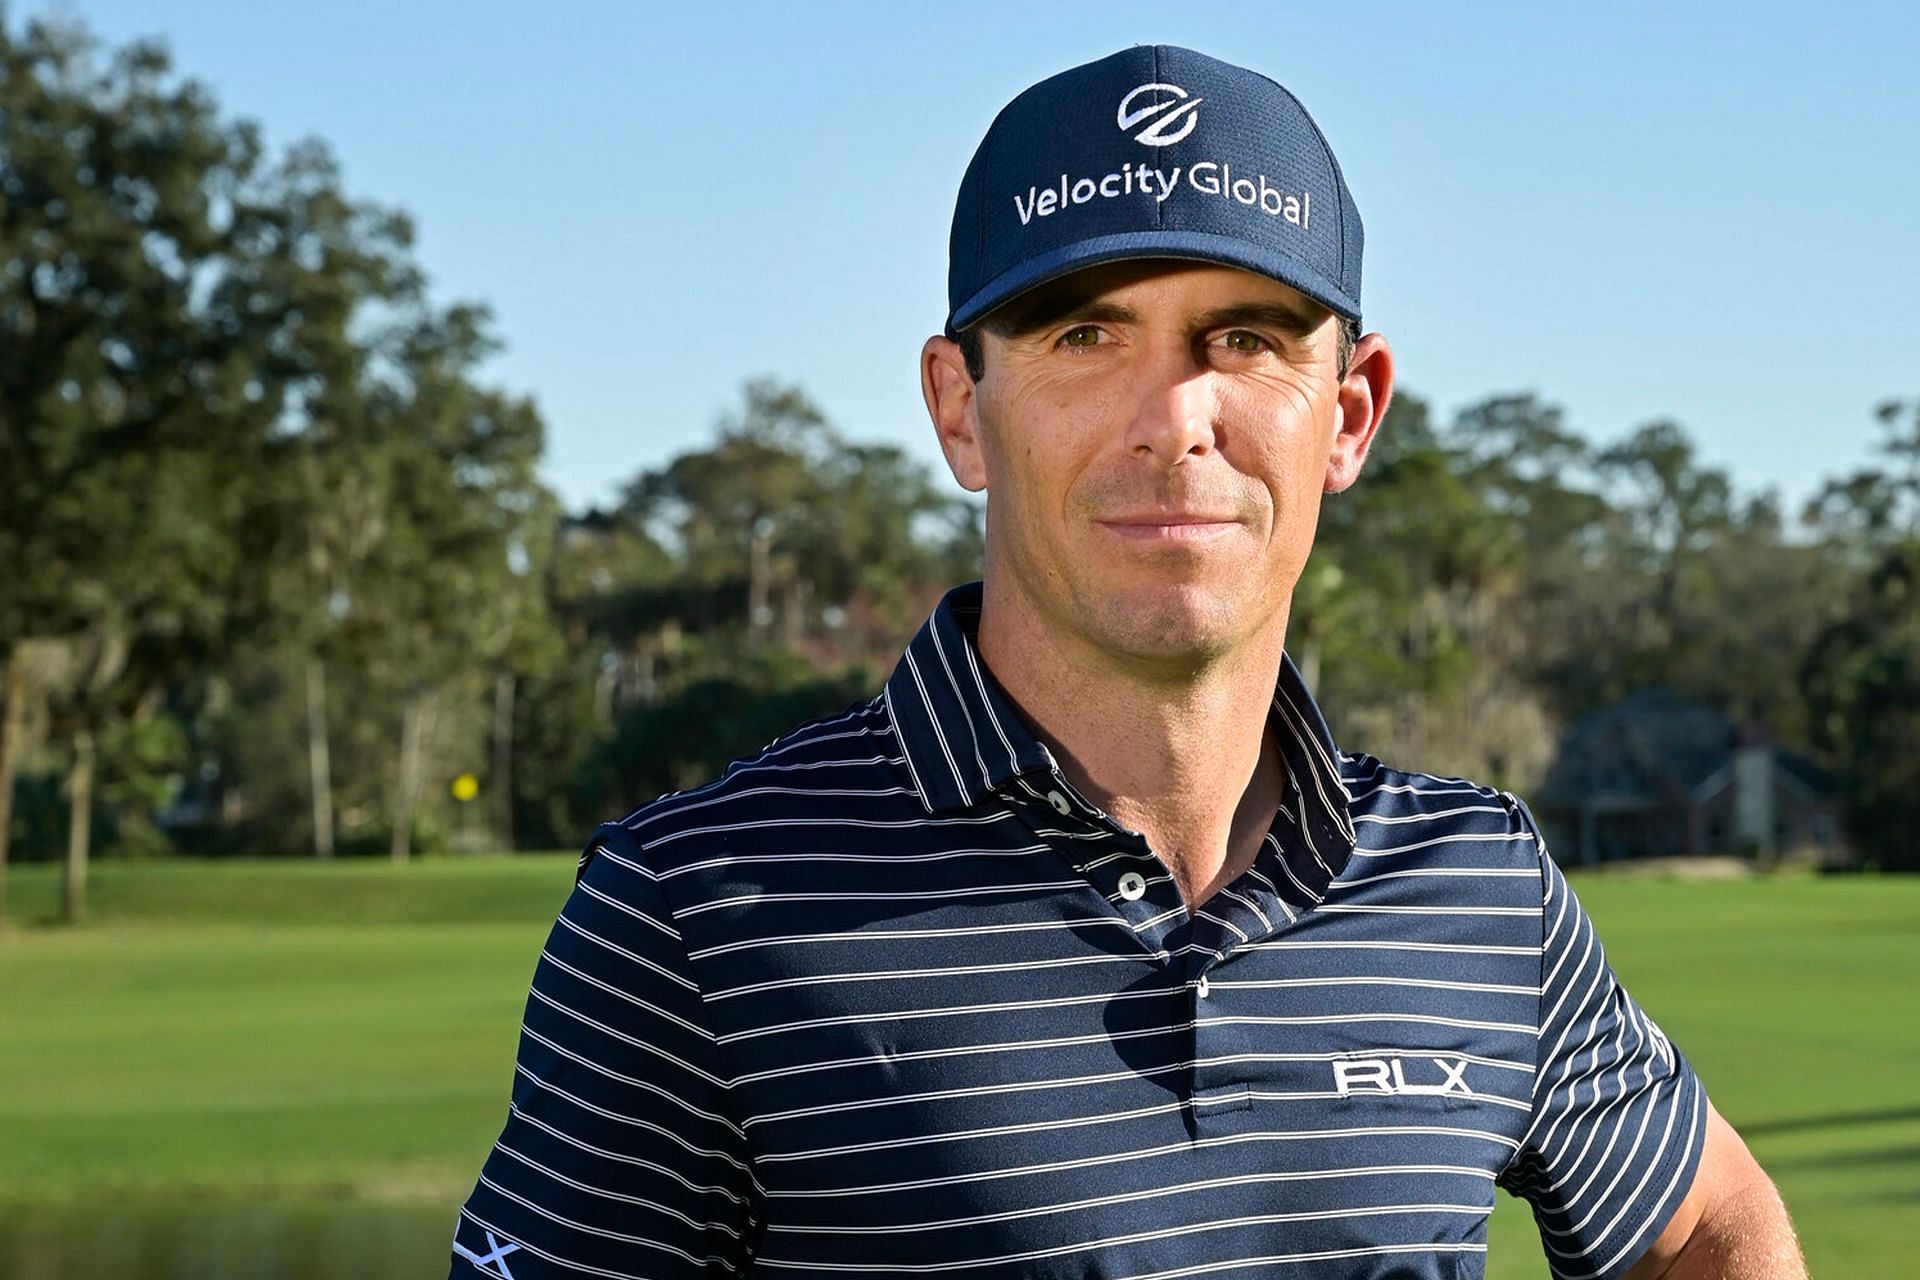 What did Billy Horschel say about LIV Golf players at the 2022 BMW PGA